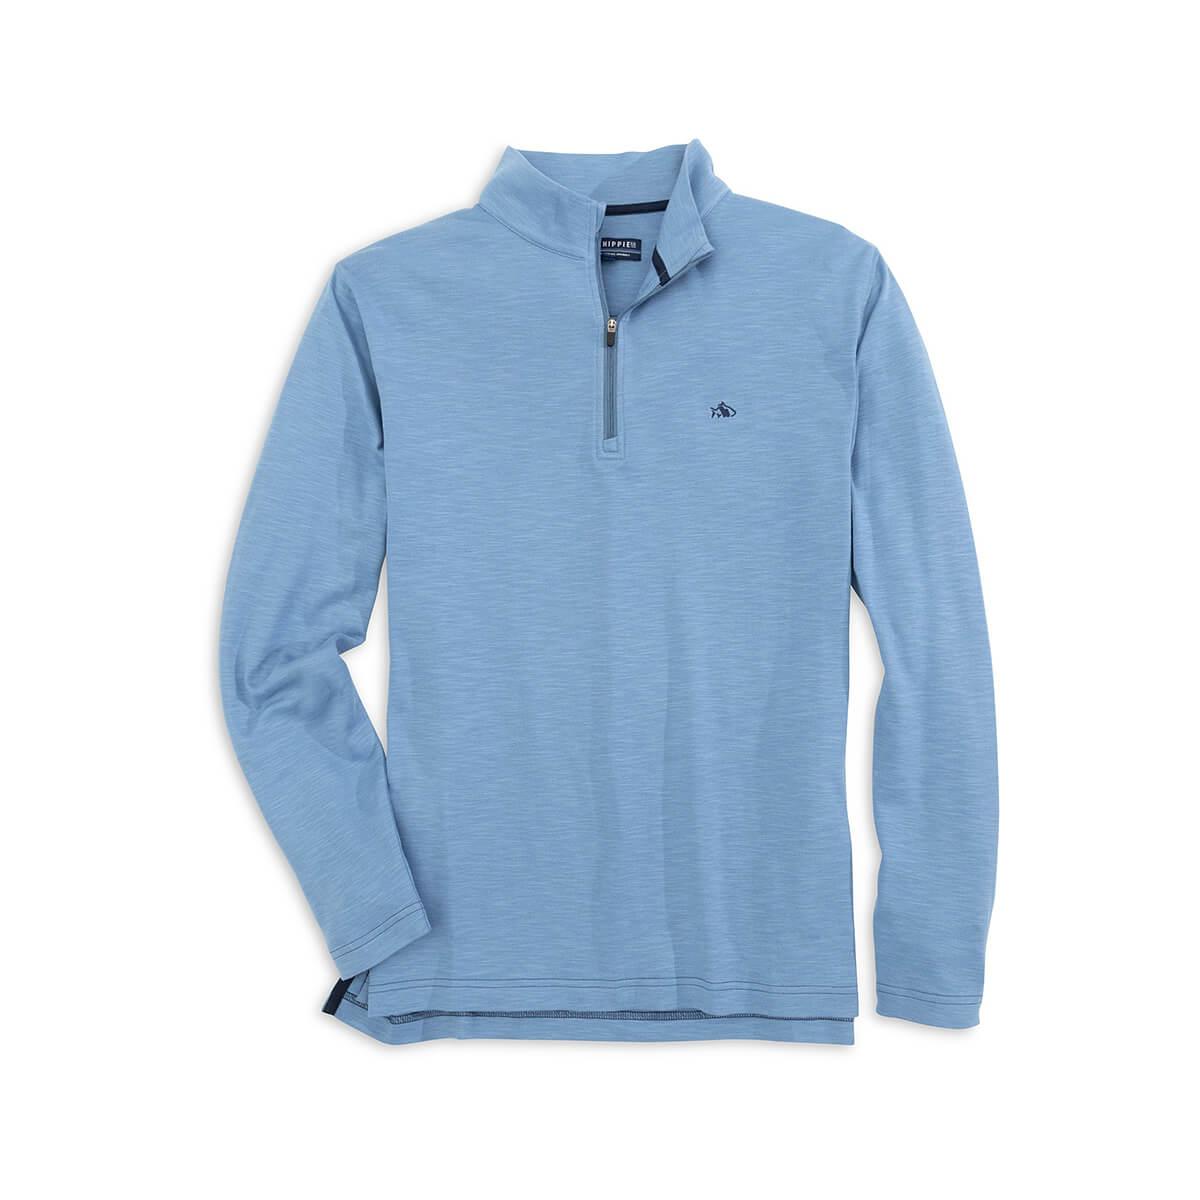  Men's Shad Point Pullover